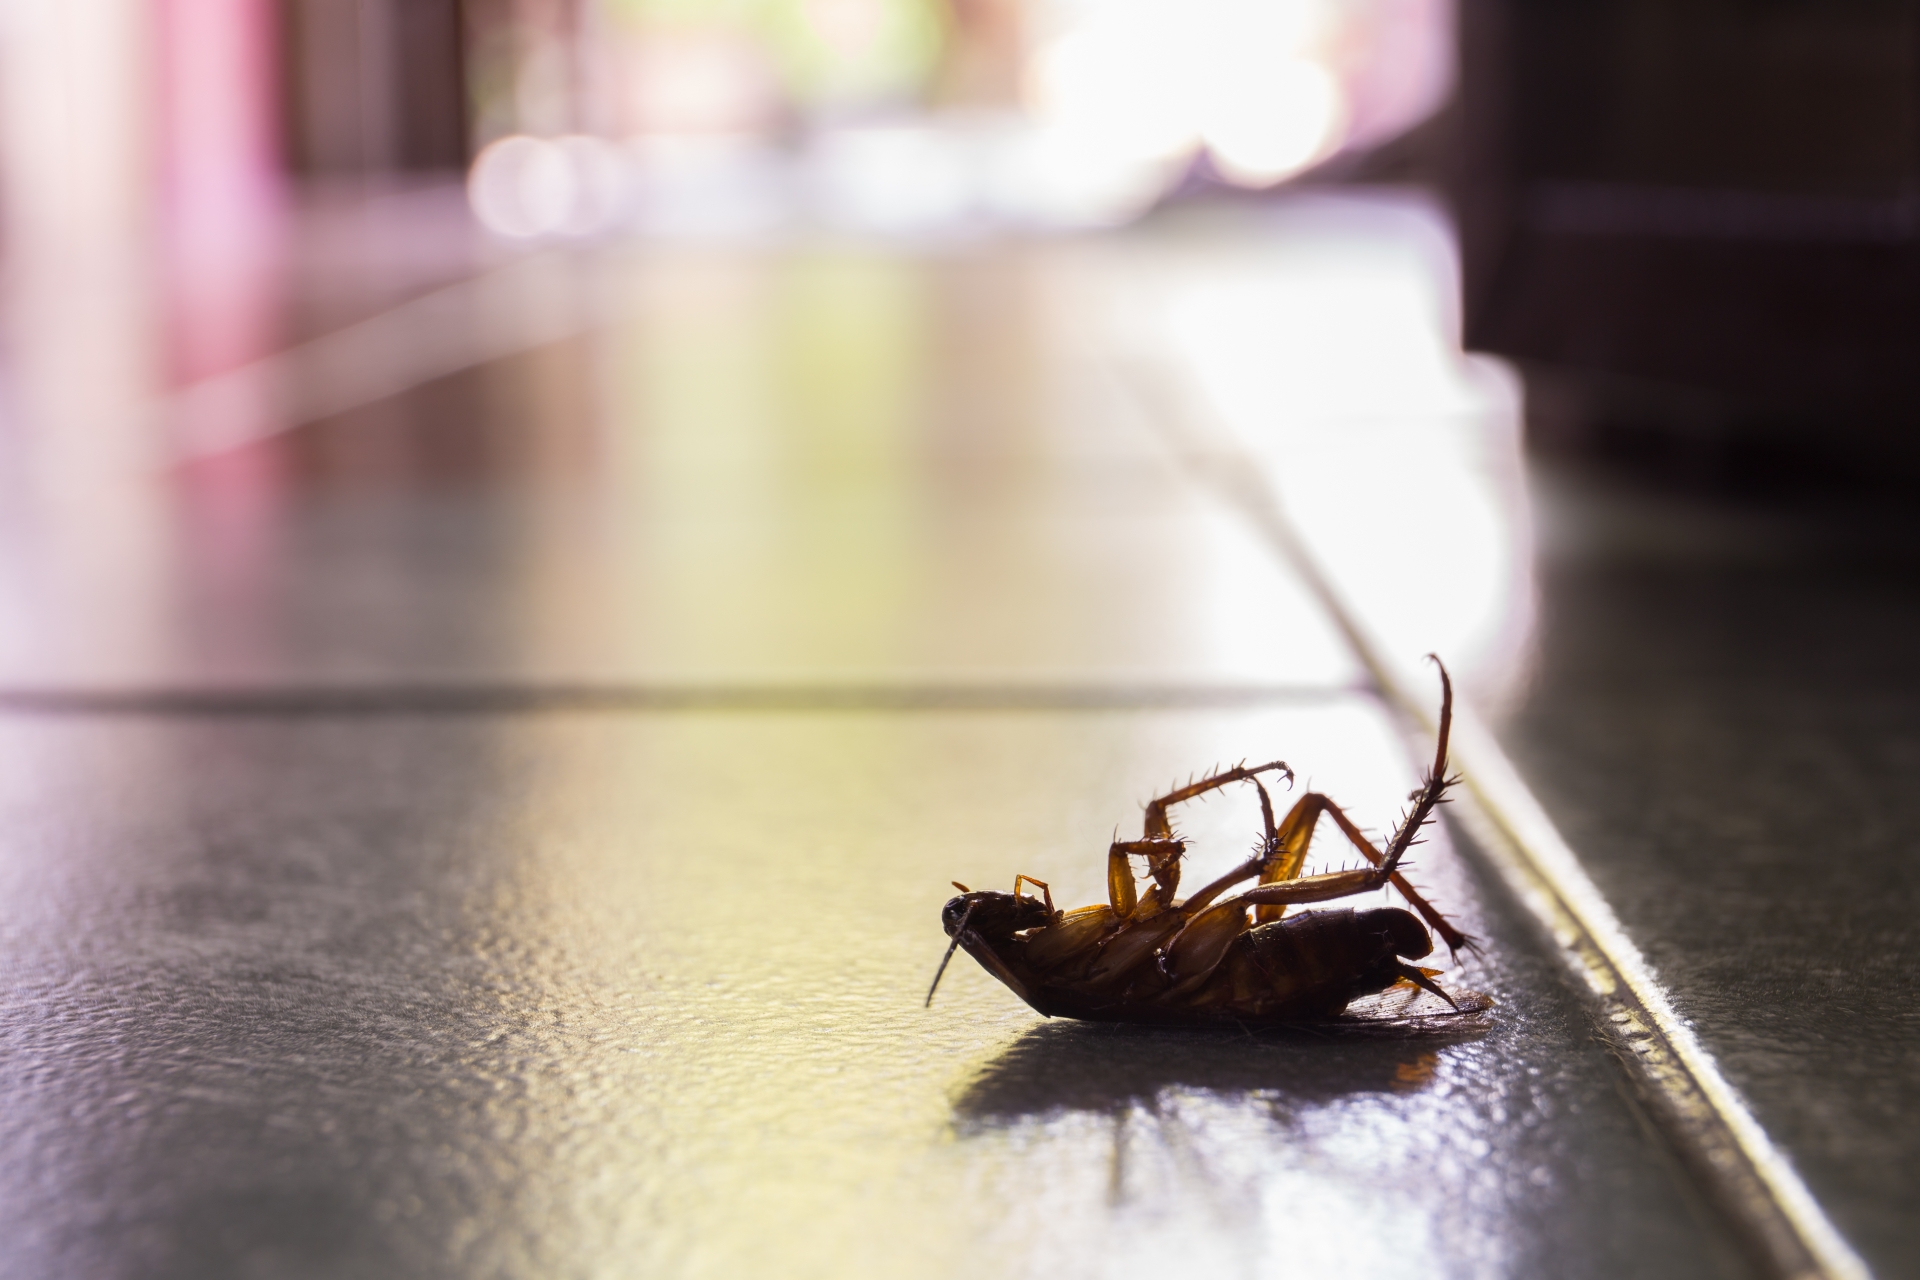 Cockroach Control, Pest Control in Beckenham, Elmers End, Park Langley, BR3. Call Now 020 8166 9746